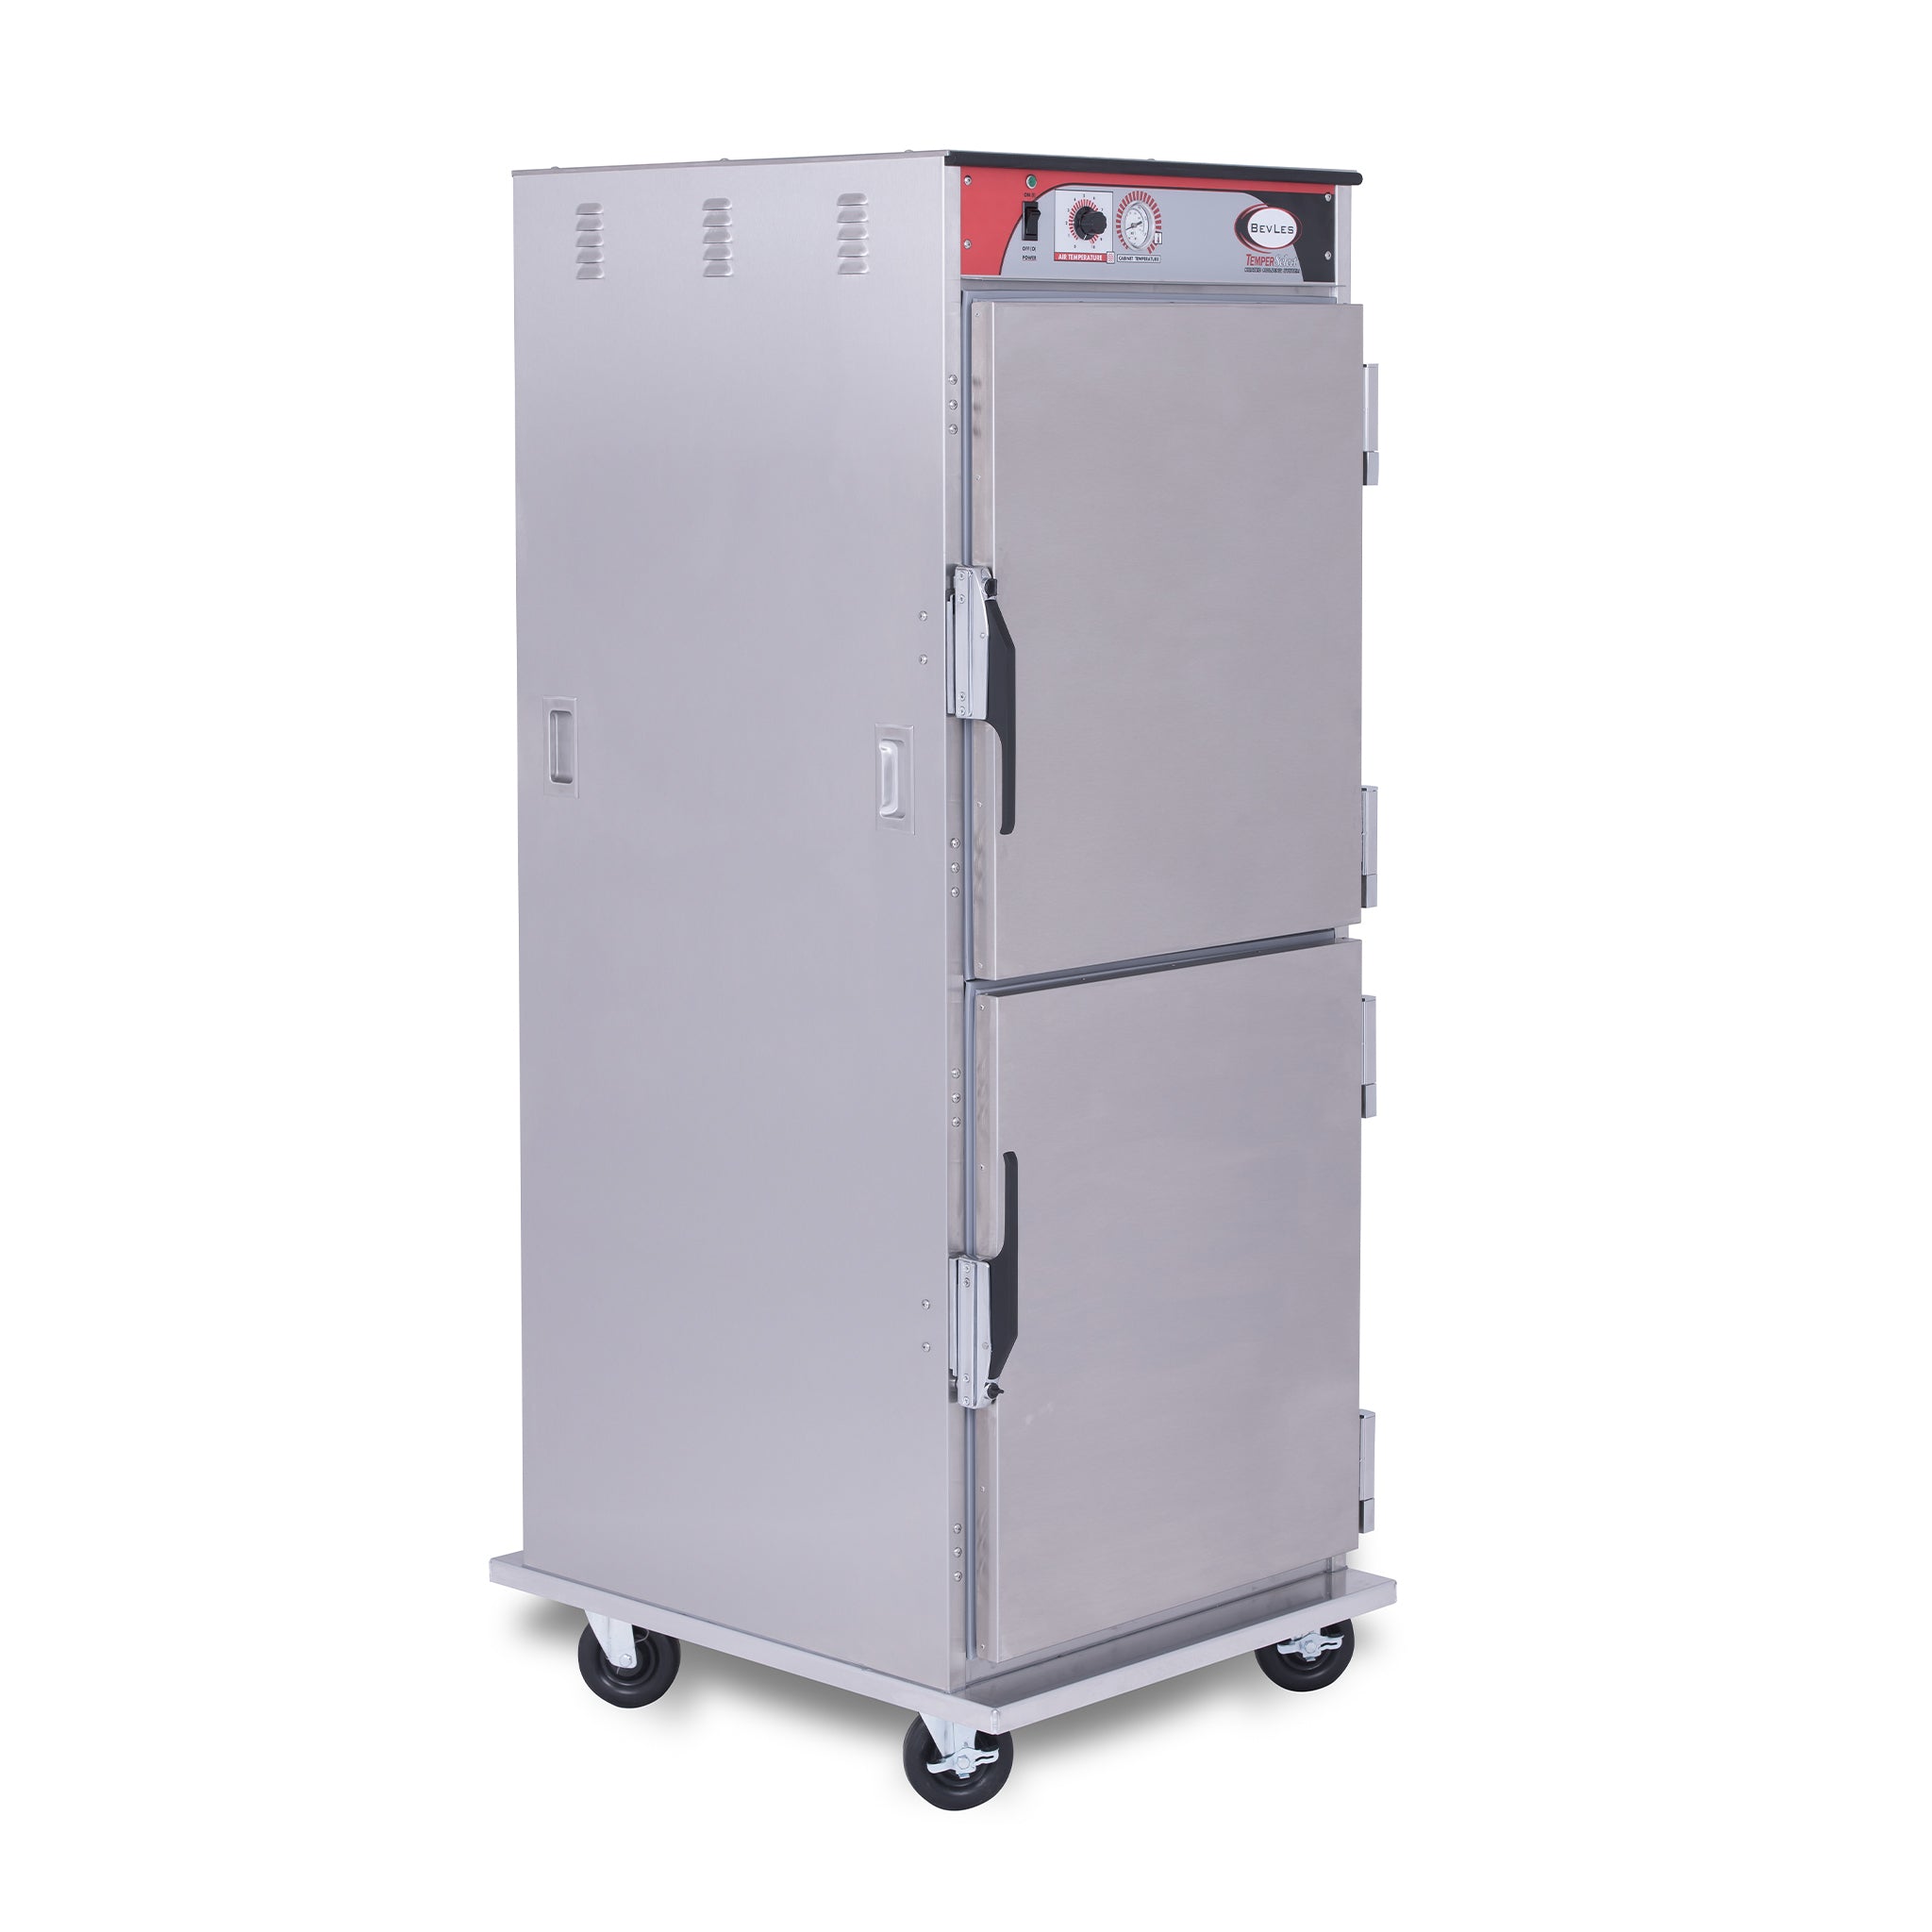 BevLes - HTSS74W121-PT, BevLes Temper Select - Pass Thru Full Size Heated Holding Cabinet, Universal Width, 115V, in Silver